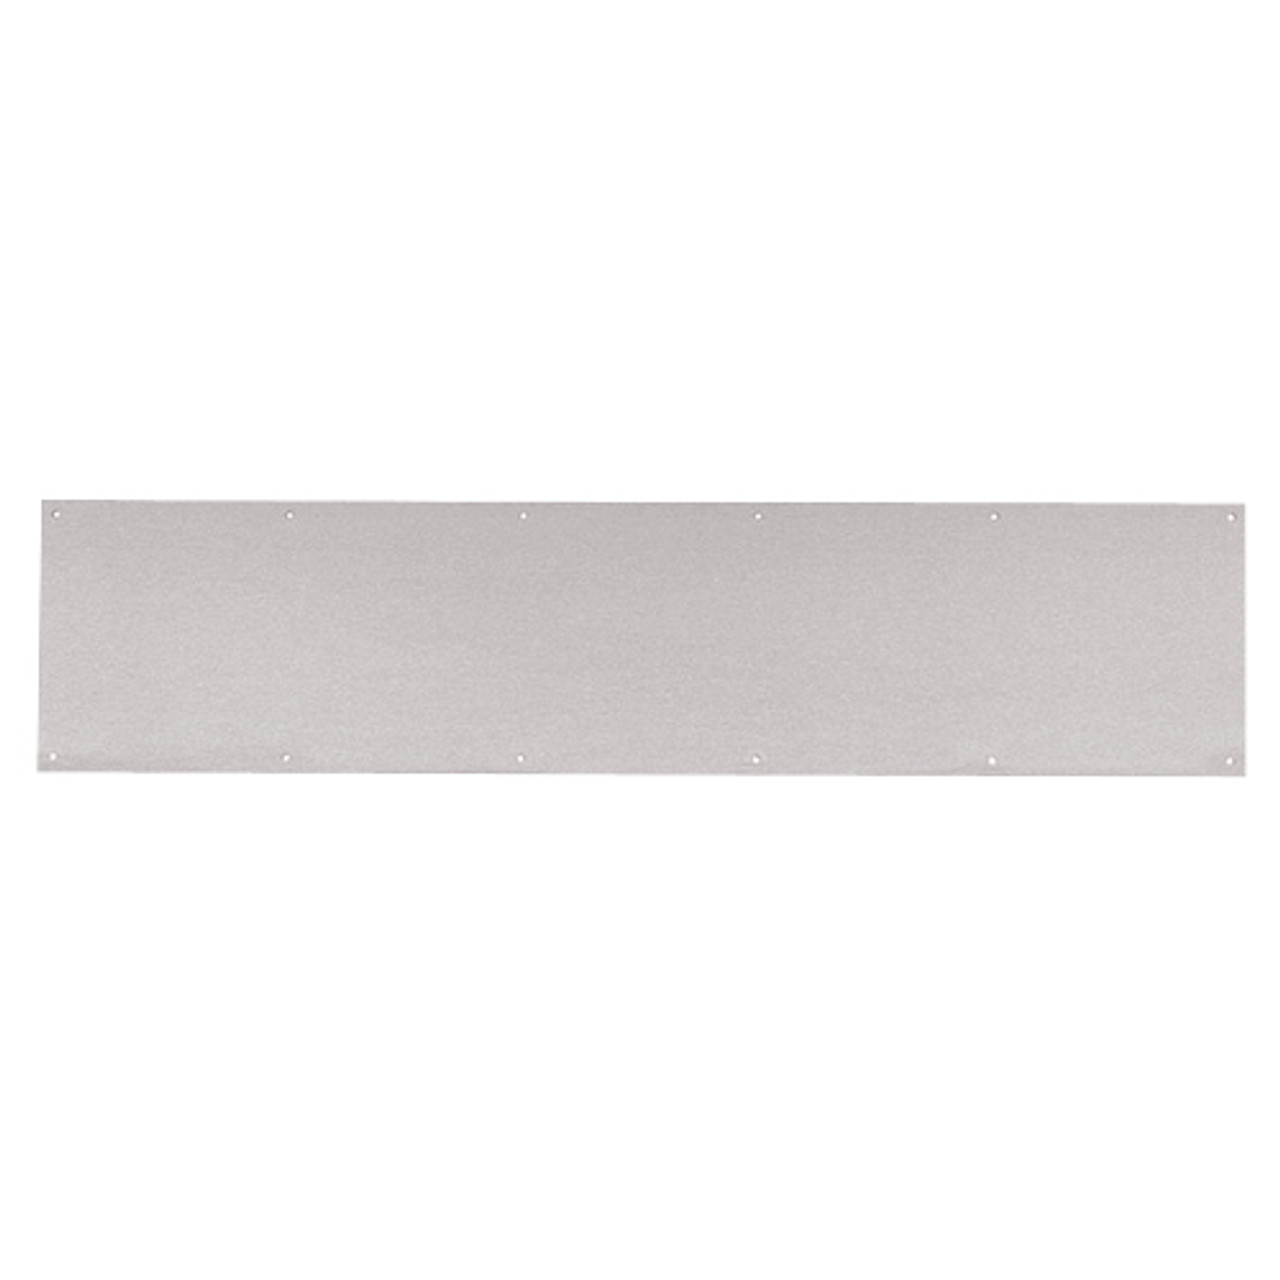 8400-US32D-10x30-B-CS Ives 8400 Series Protection Plate in Satin Stainless Steel